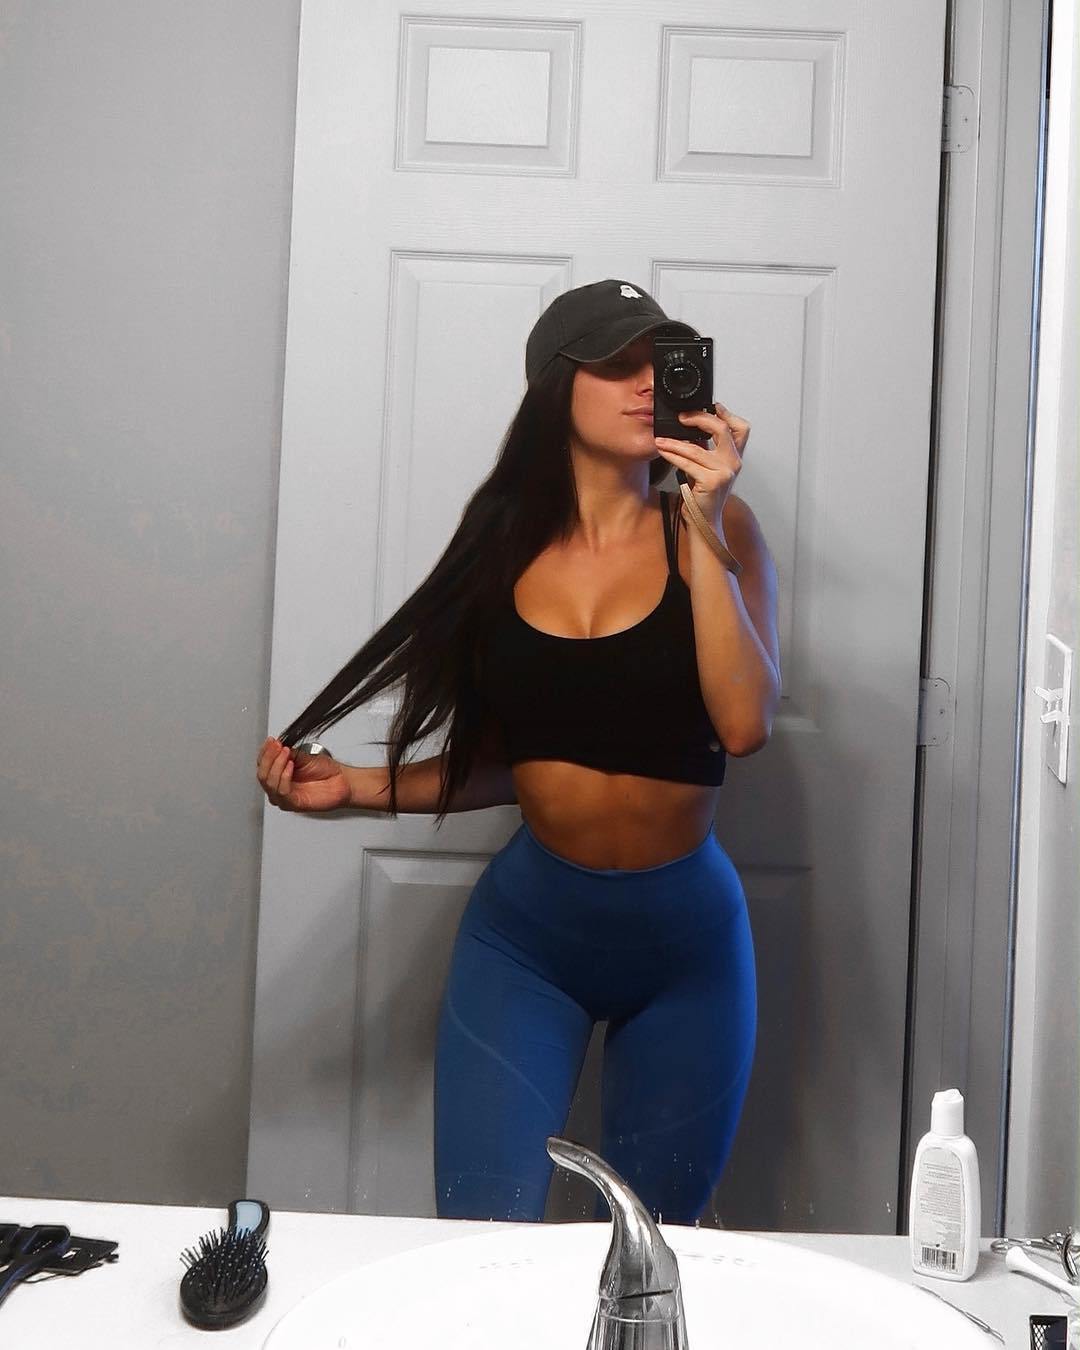 37 hot girls in yoga pants to get the weekend started.